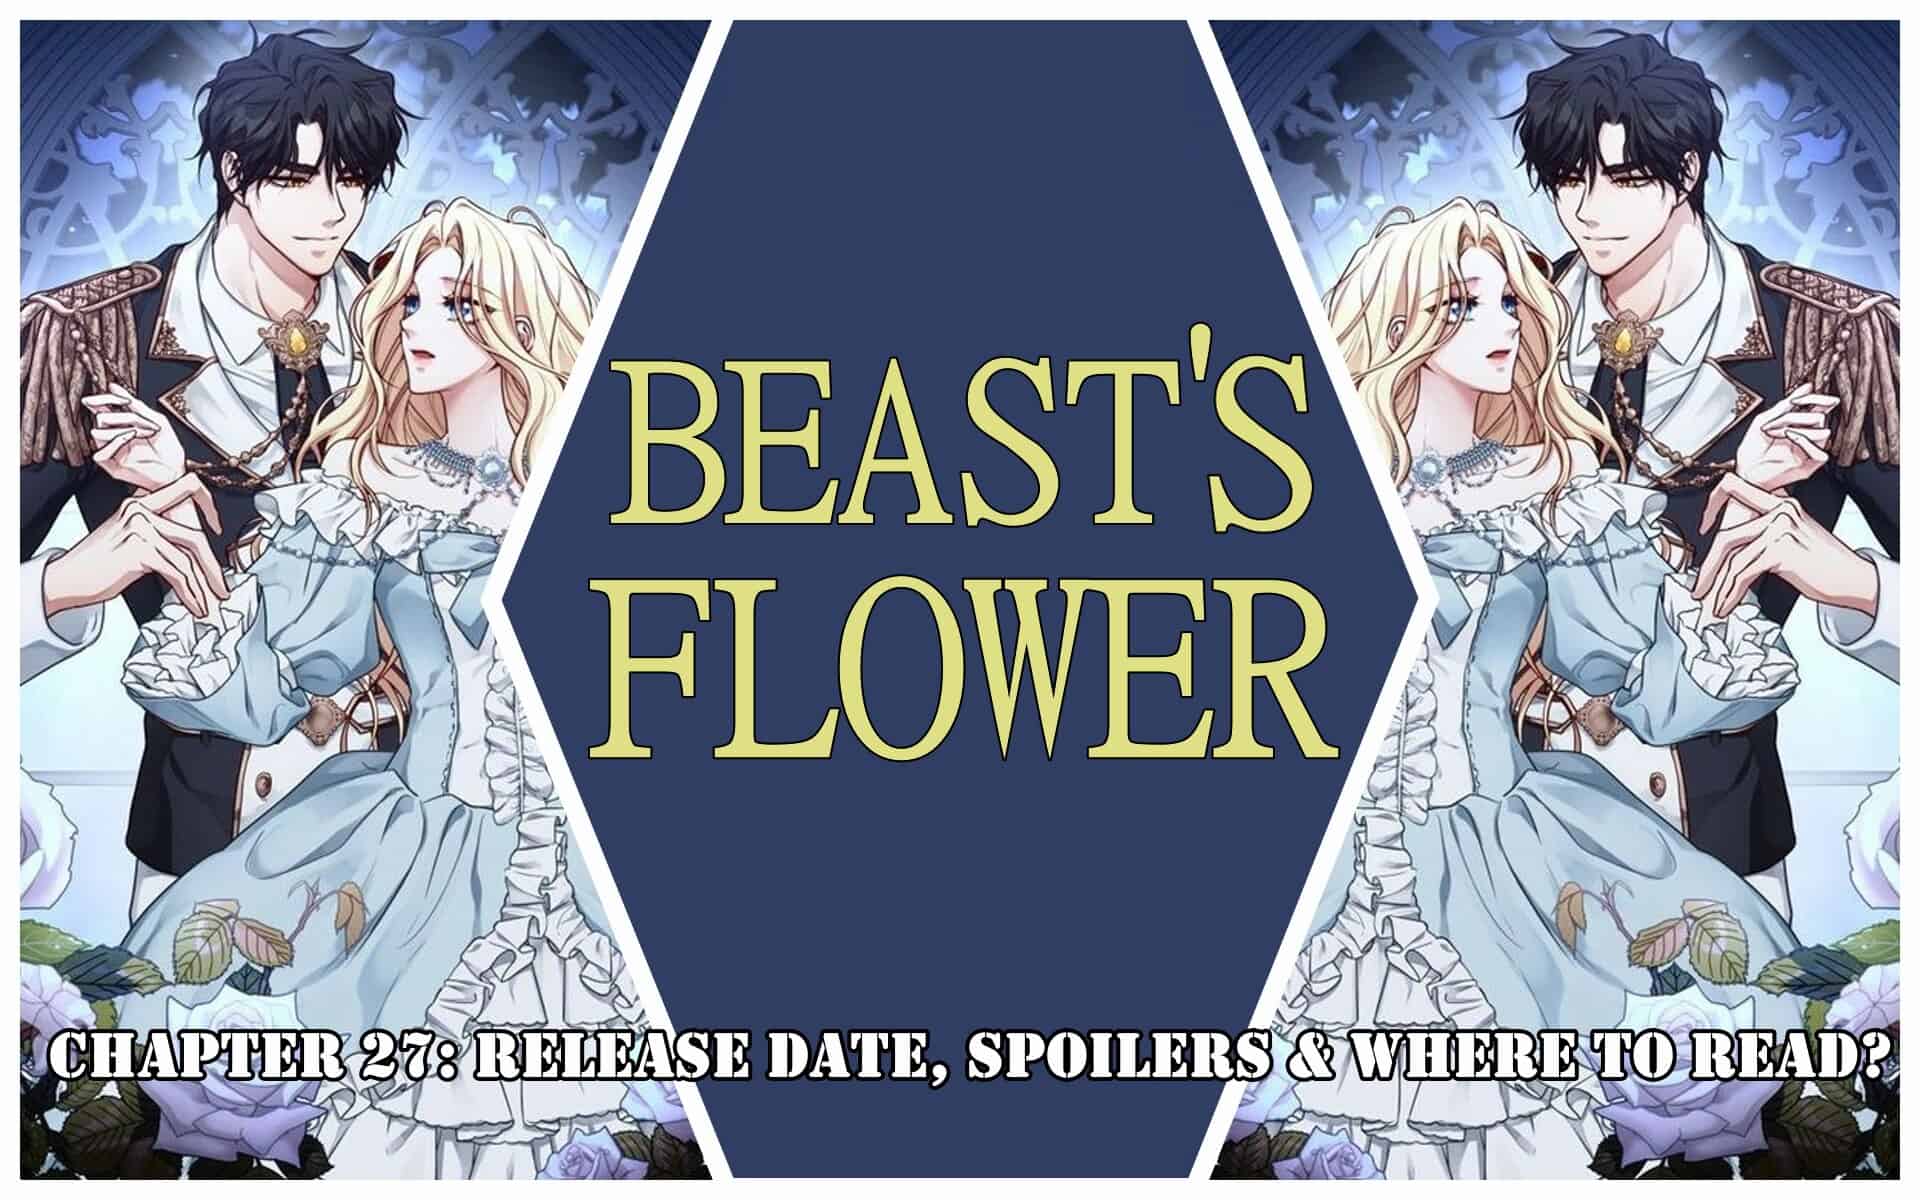 Beast’s Flower Chapter 27: Release Date, Spoilers & Where to Read?